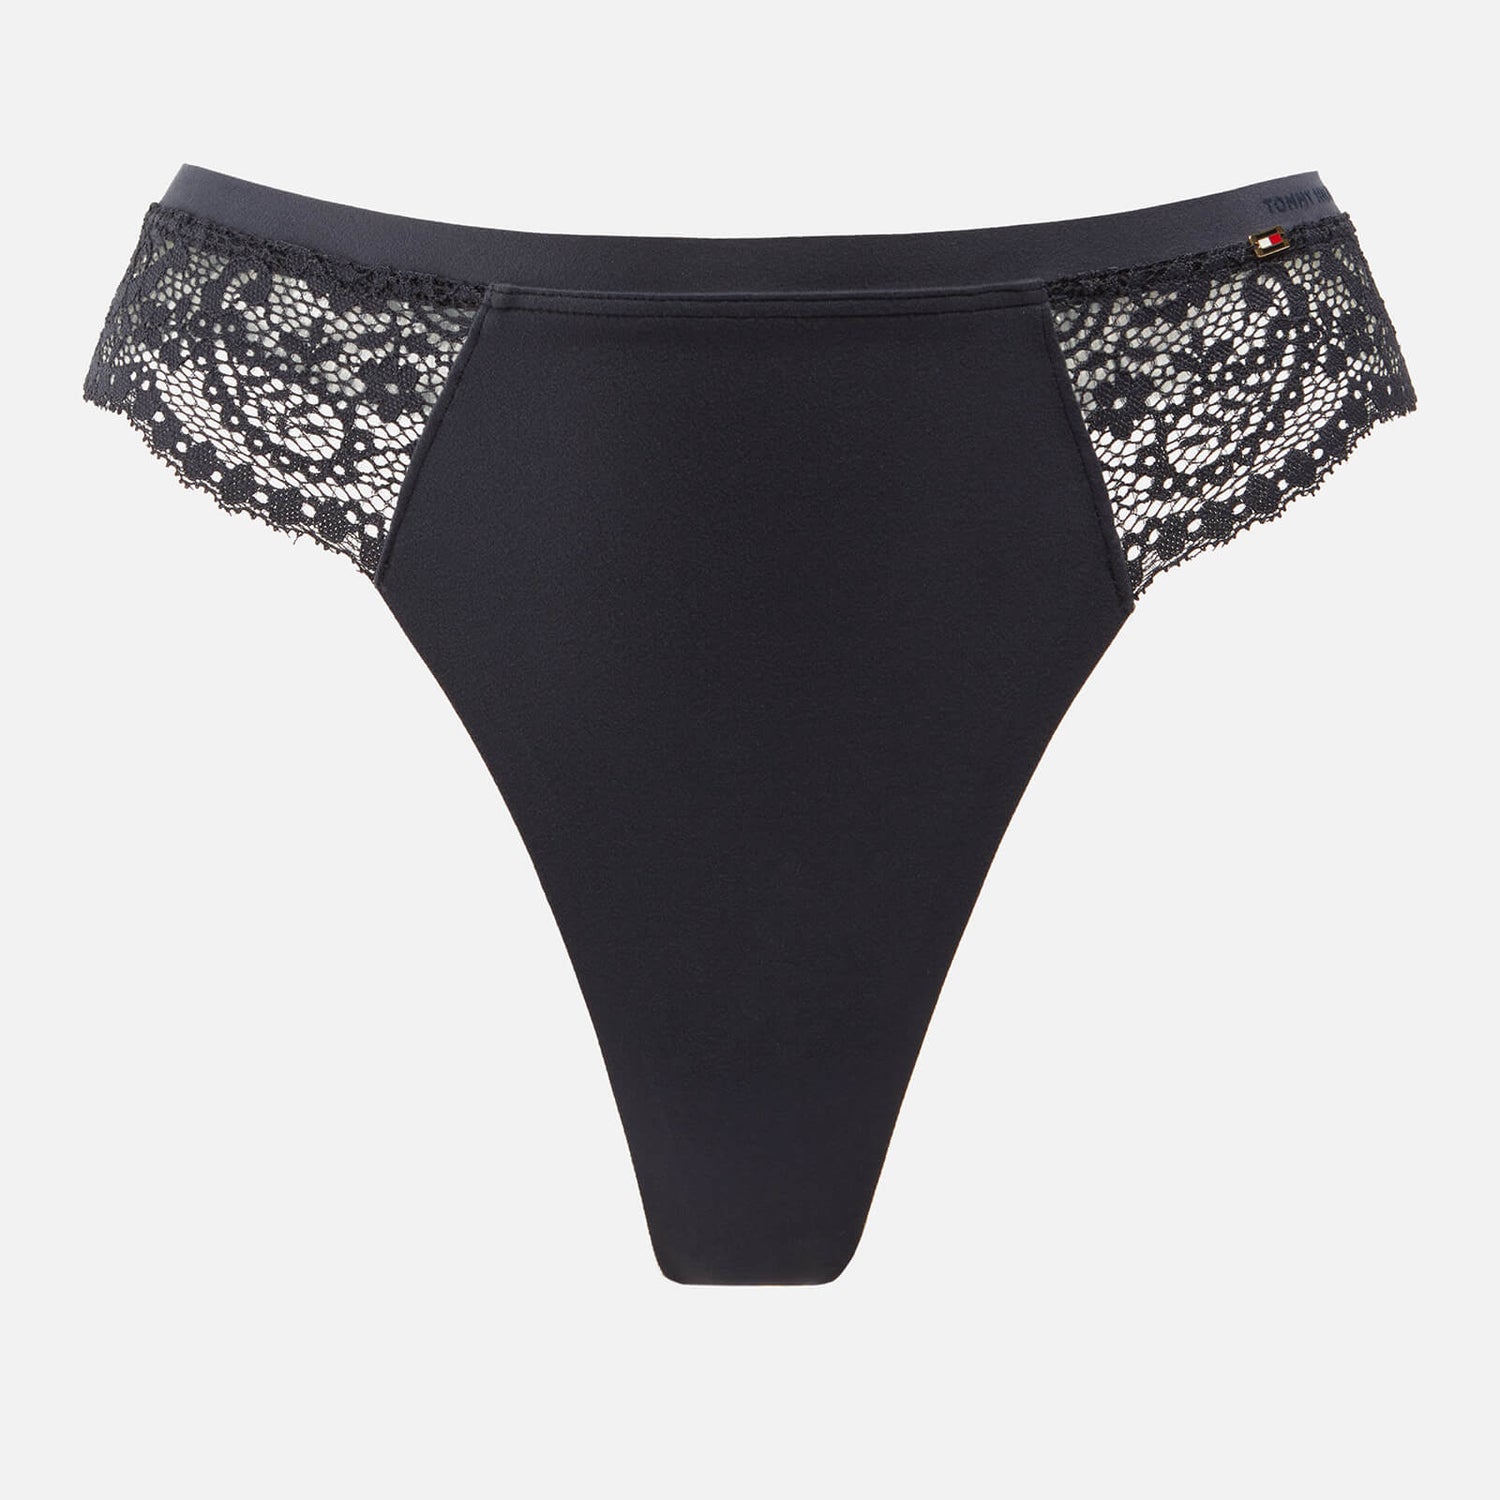 Tommy Hilfiger Stretch Jersey Lace Thong - S